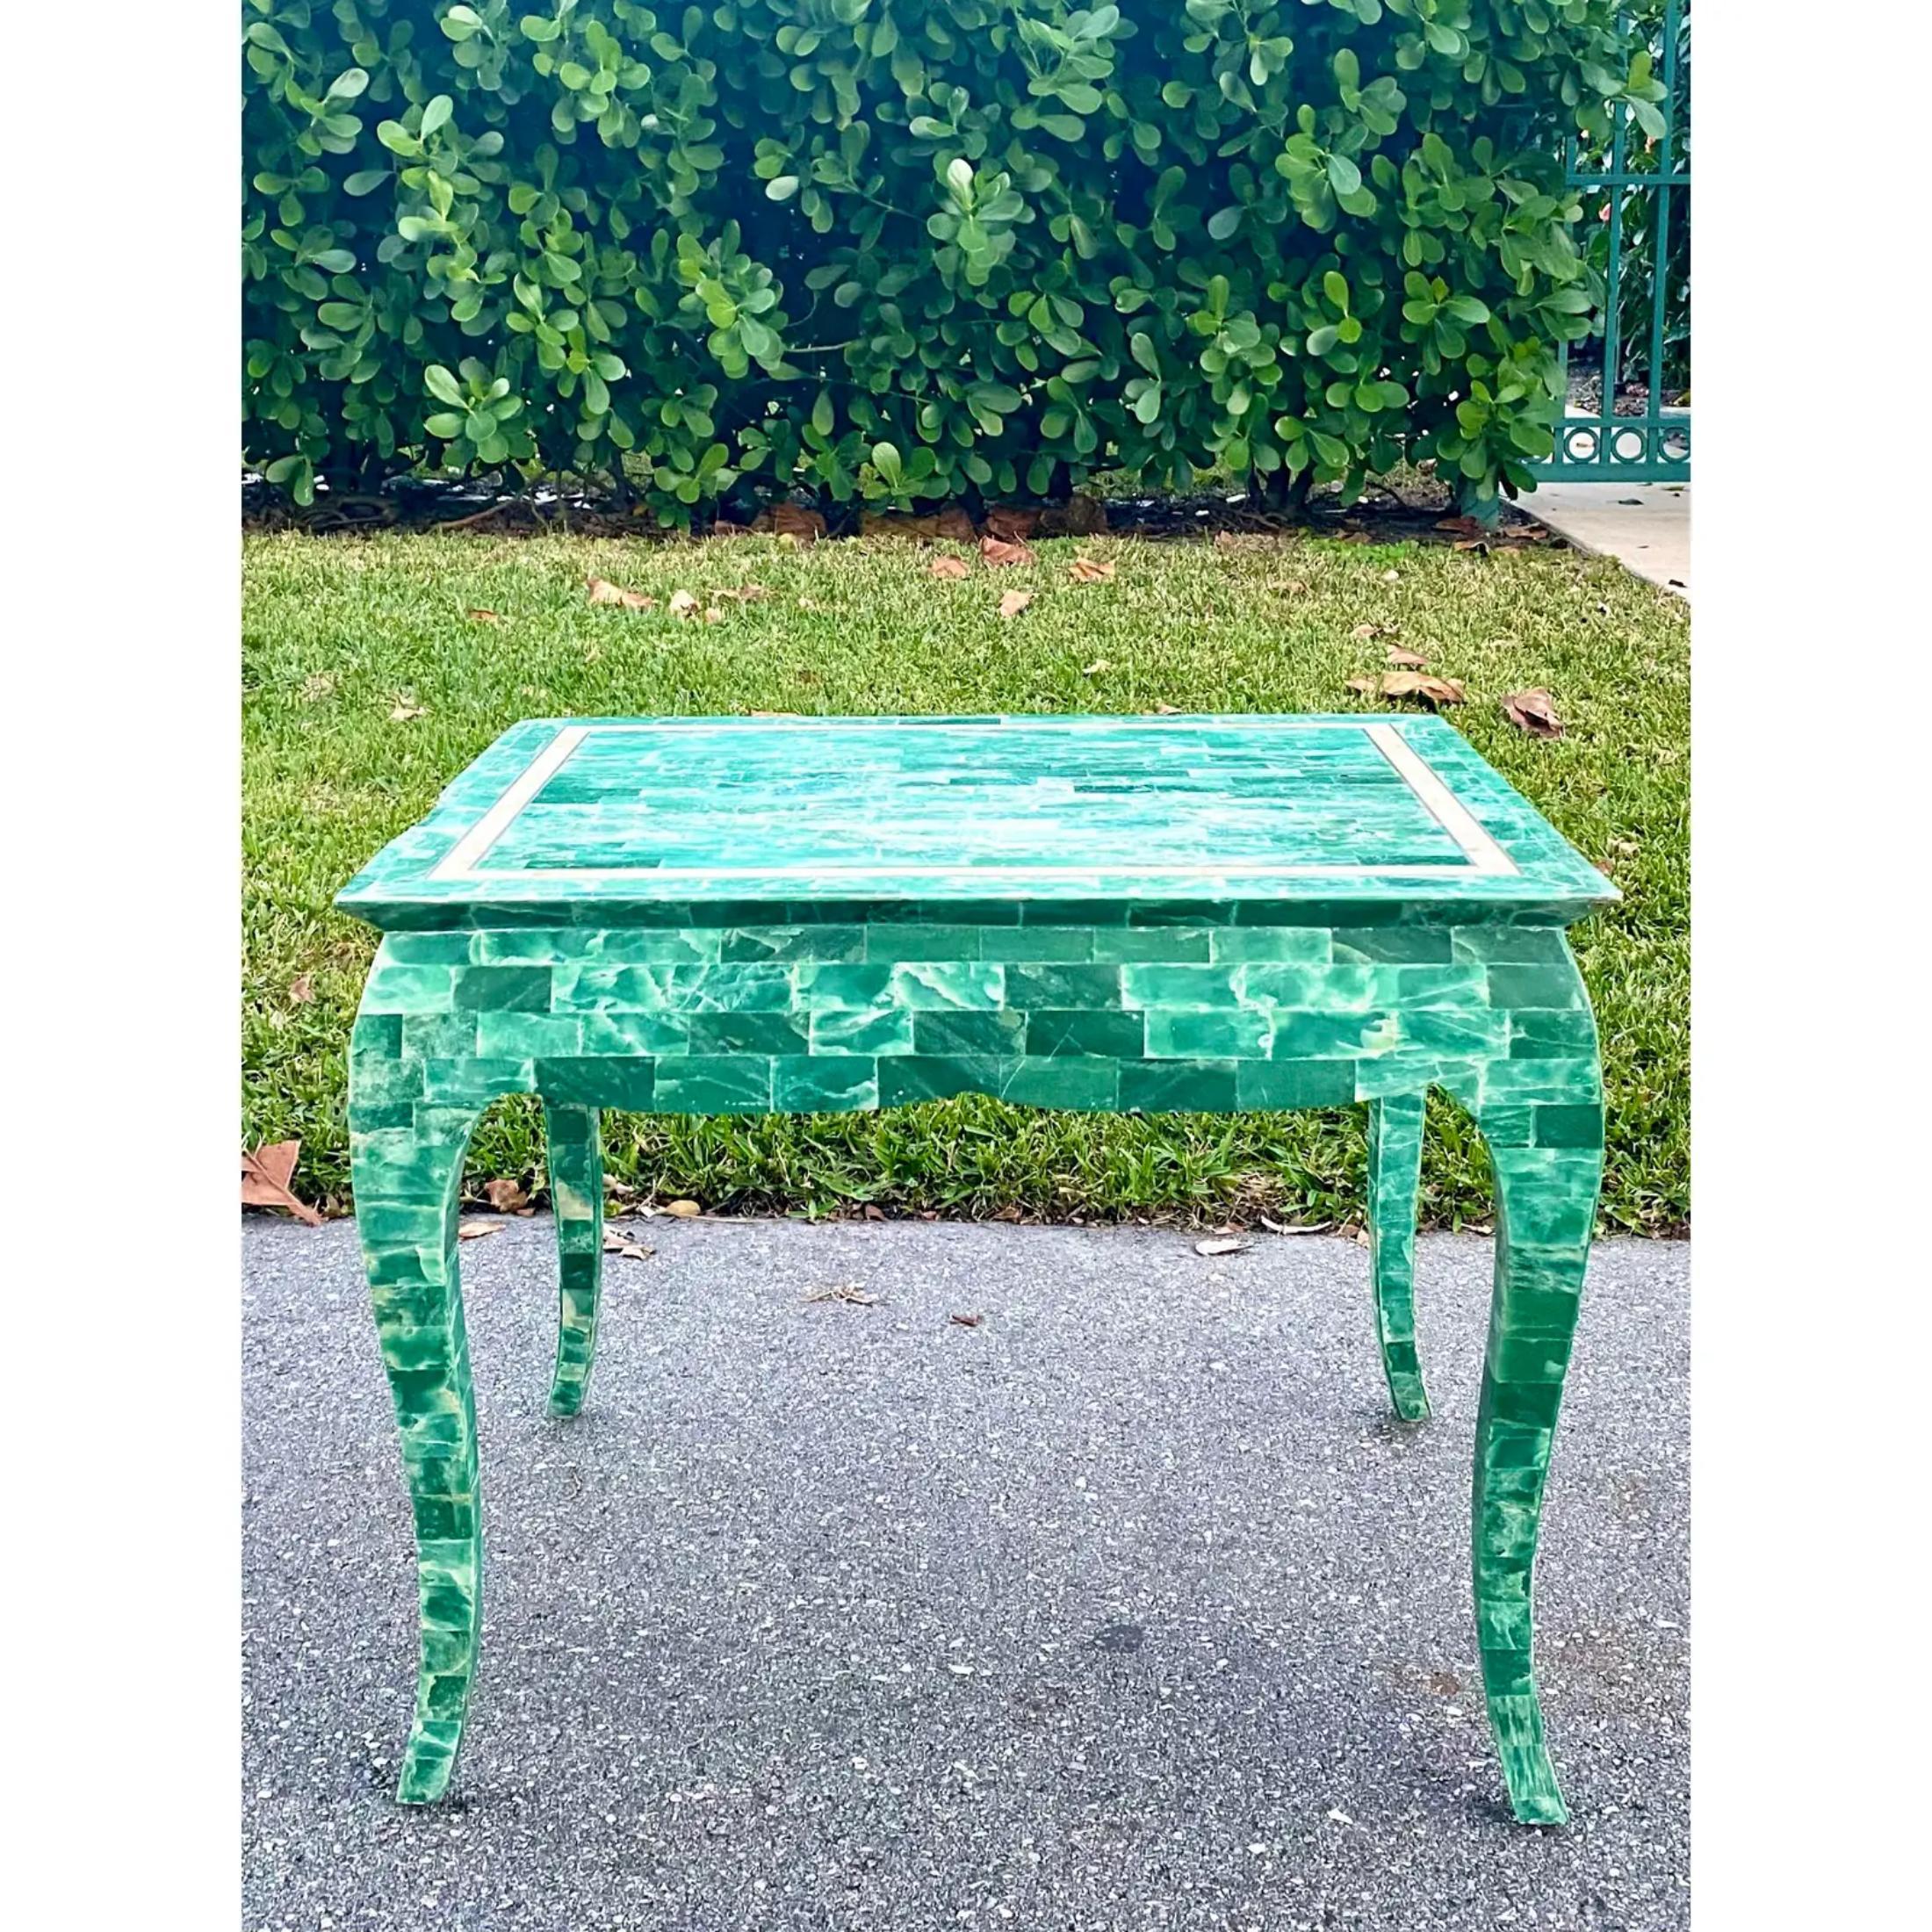 Outstanding tessellated stone side table. A brilliant green color and inlay brass detail make this a real collectors item. Cabriolet legs make this a perfect and dramatic side table, but would also be genius as a high coffee table. Acquired from a